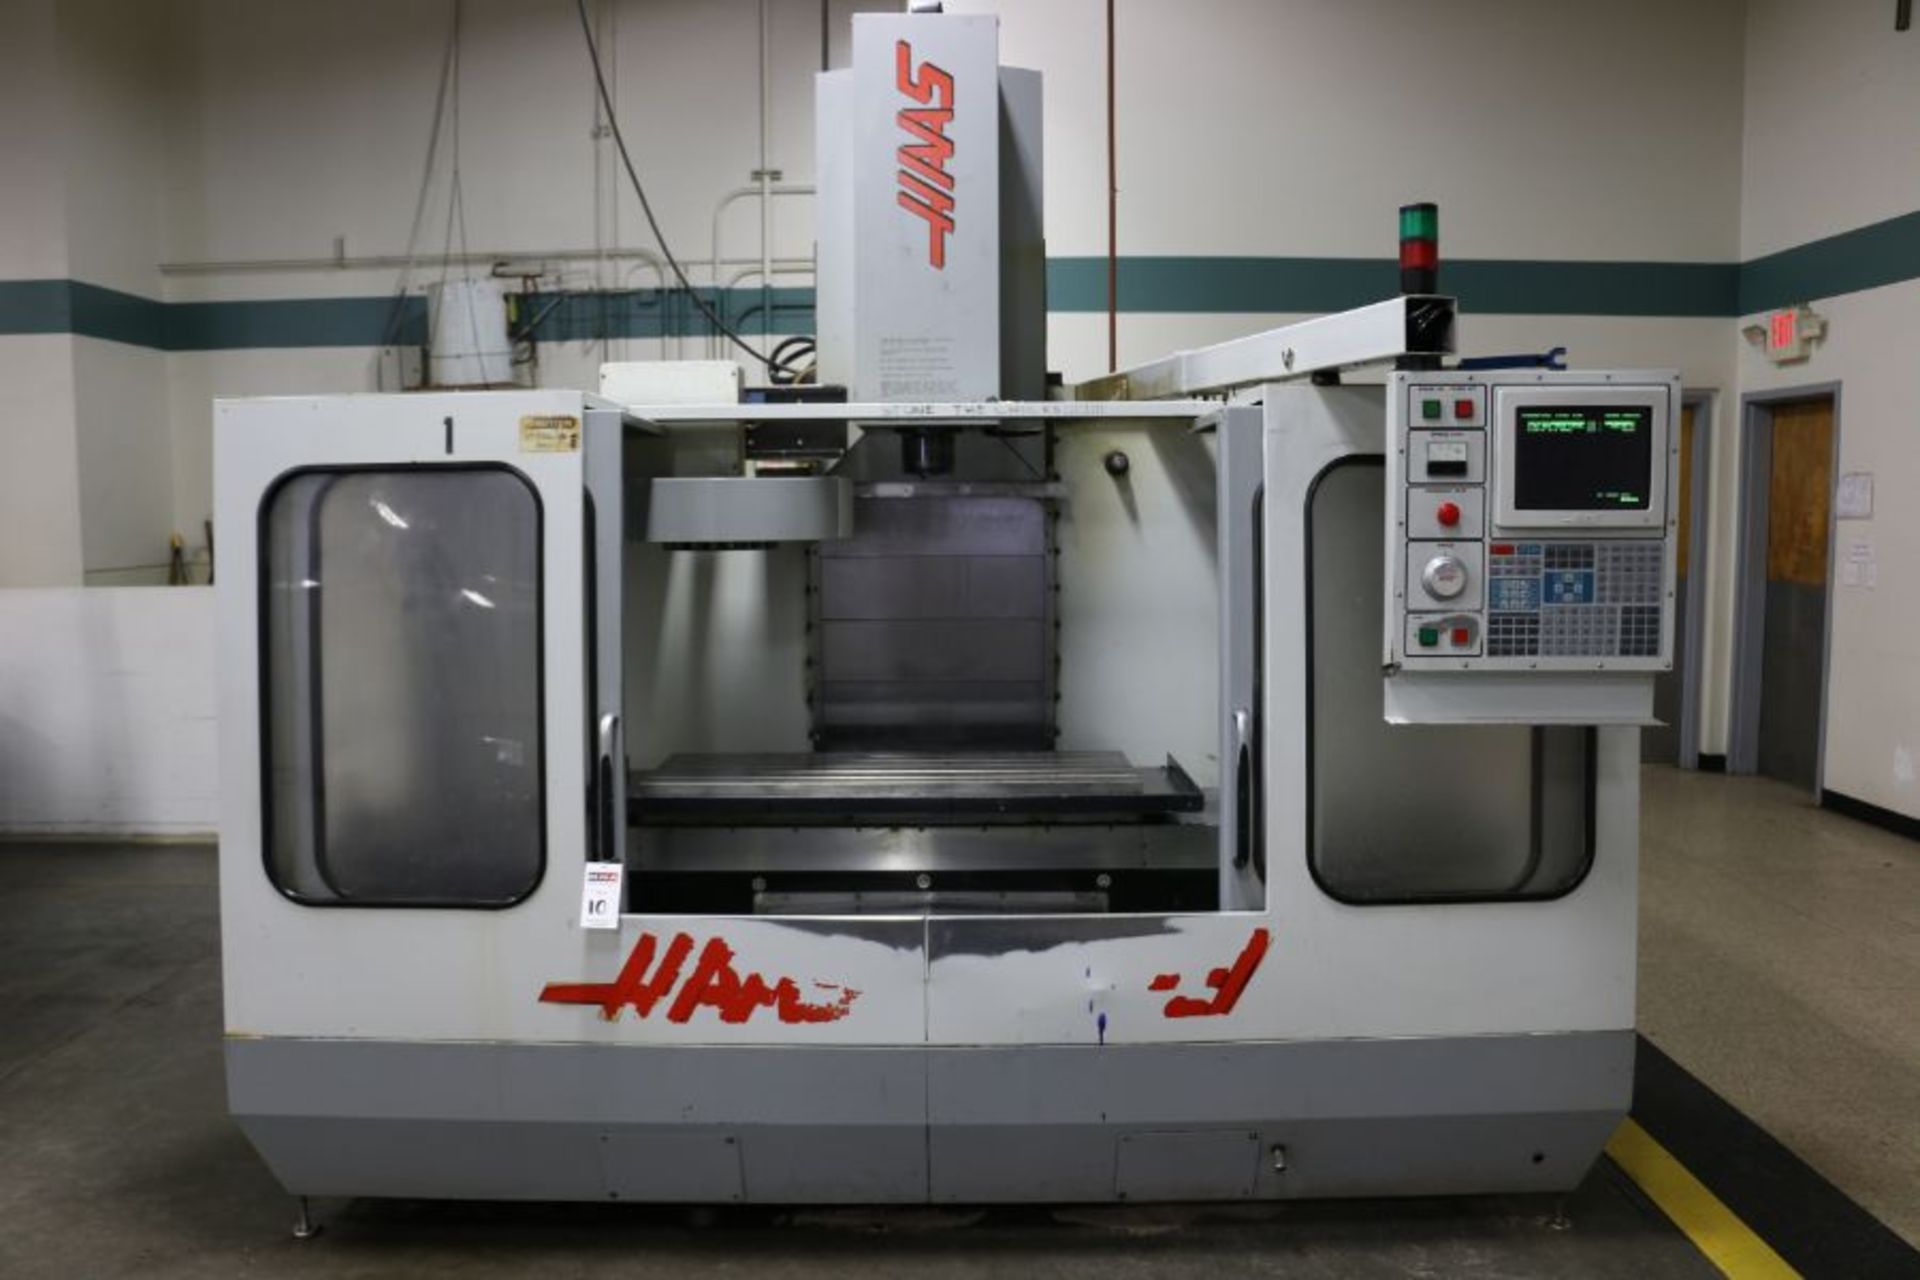 Haas VF-3, 40"x20"x20" Travels, 20 Position Tool Carousel, CT-40 Taper, s/n 4311, New 1995 - Image 4 of 11